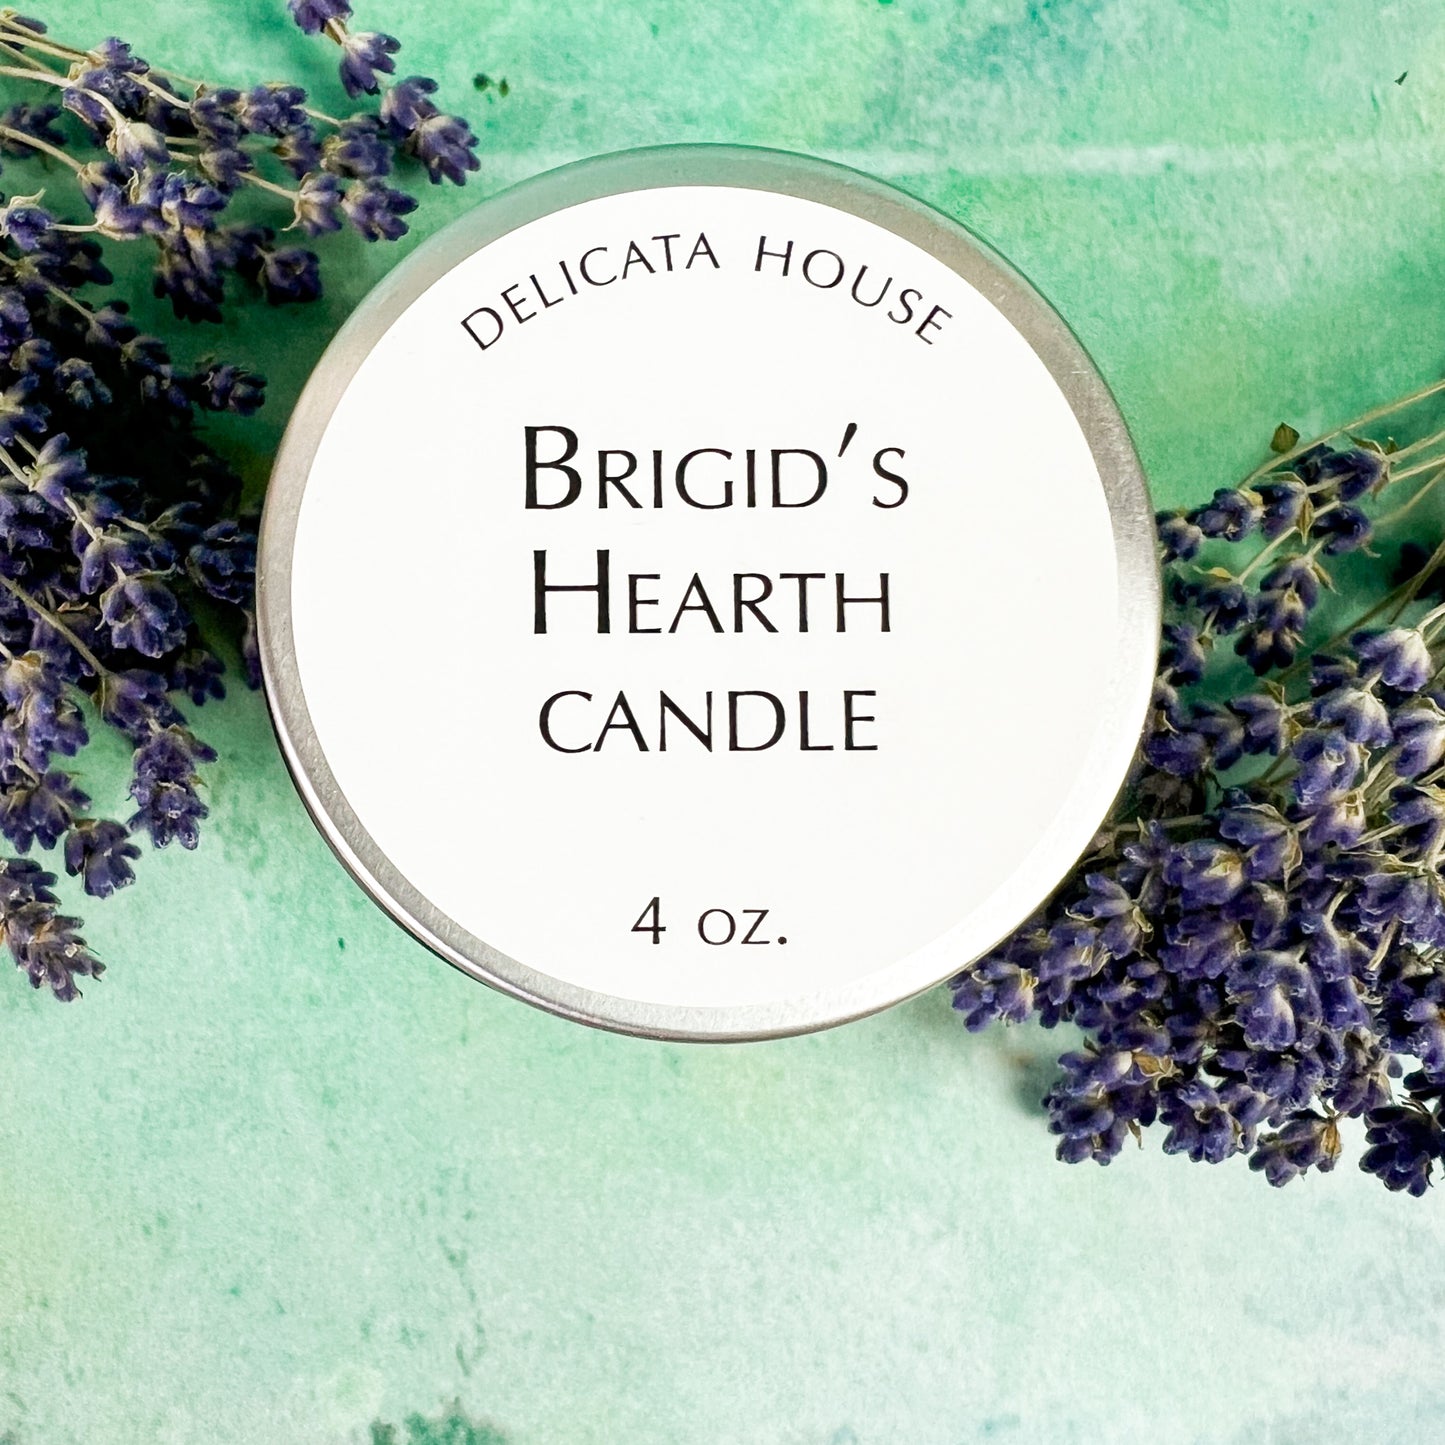 Brigid's Hearth Candle - Sacred Feminine Candle - Soothing and Mood Balancing Candle